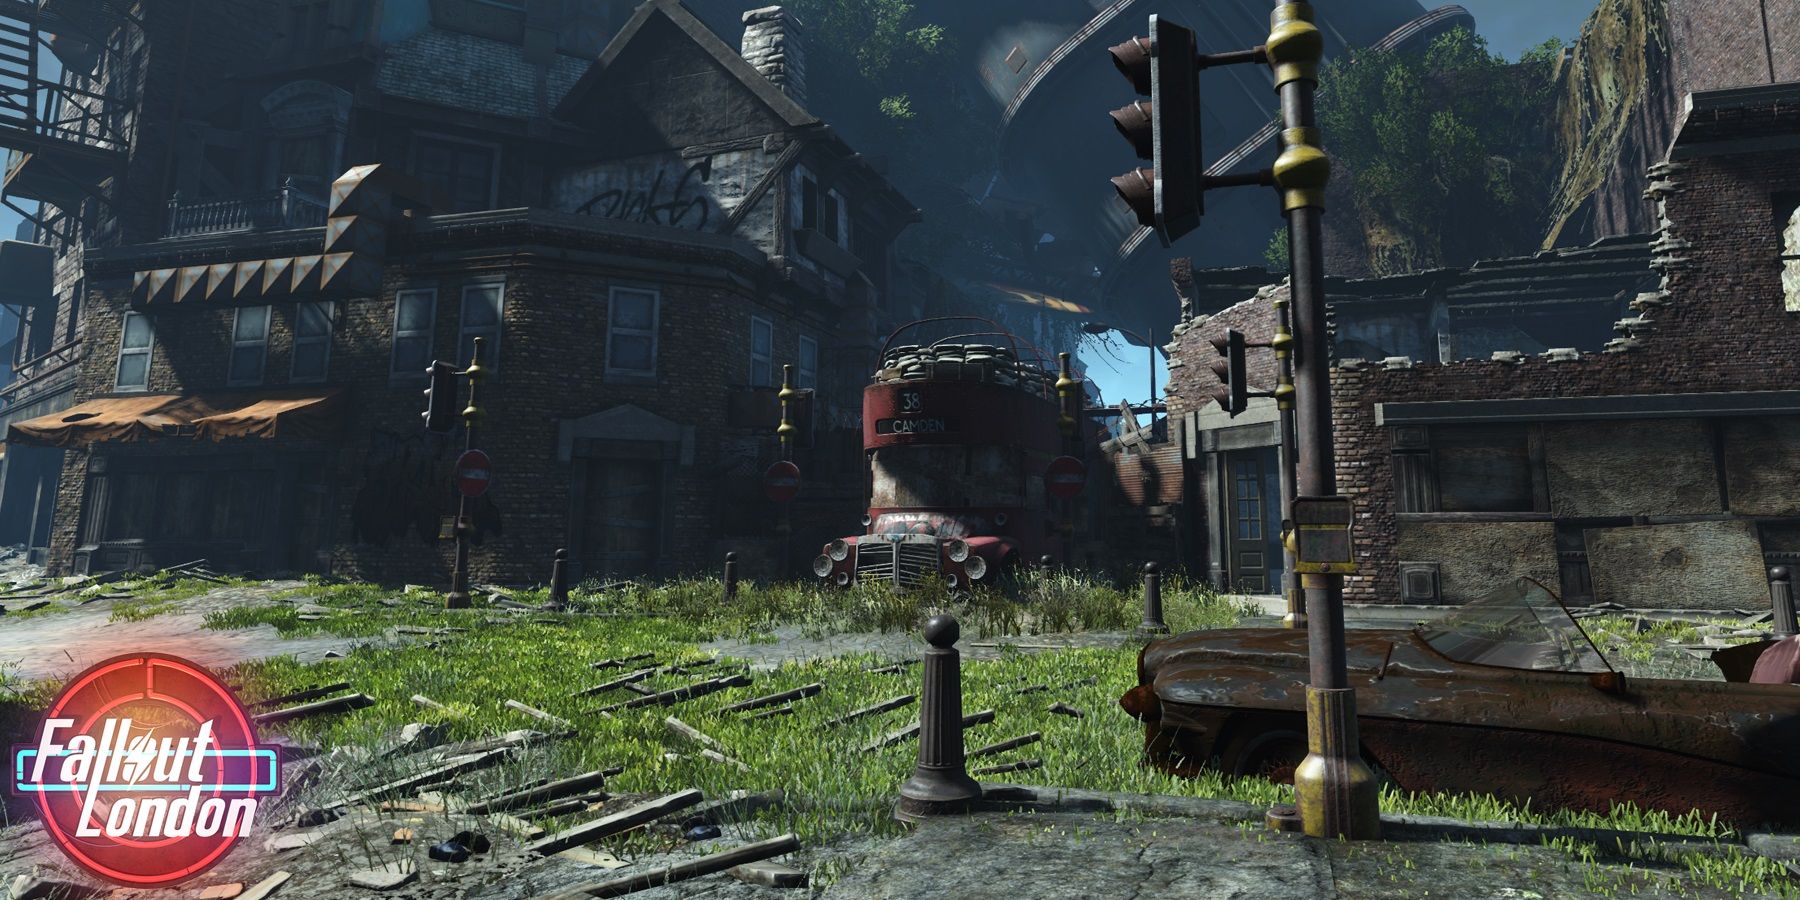 Screenshot of Fallout: London mod showing a post-apocalyptic city street